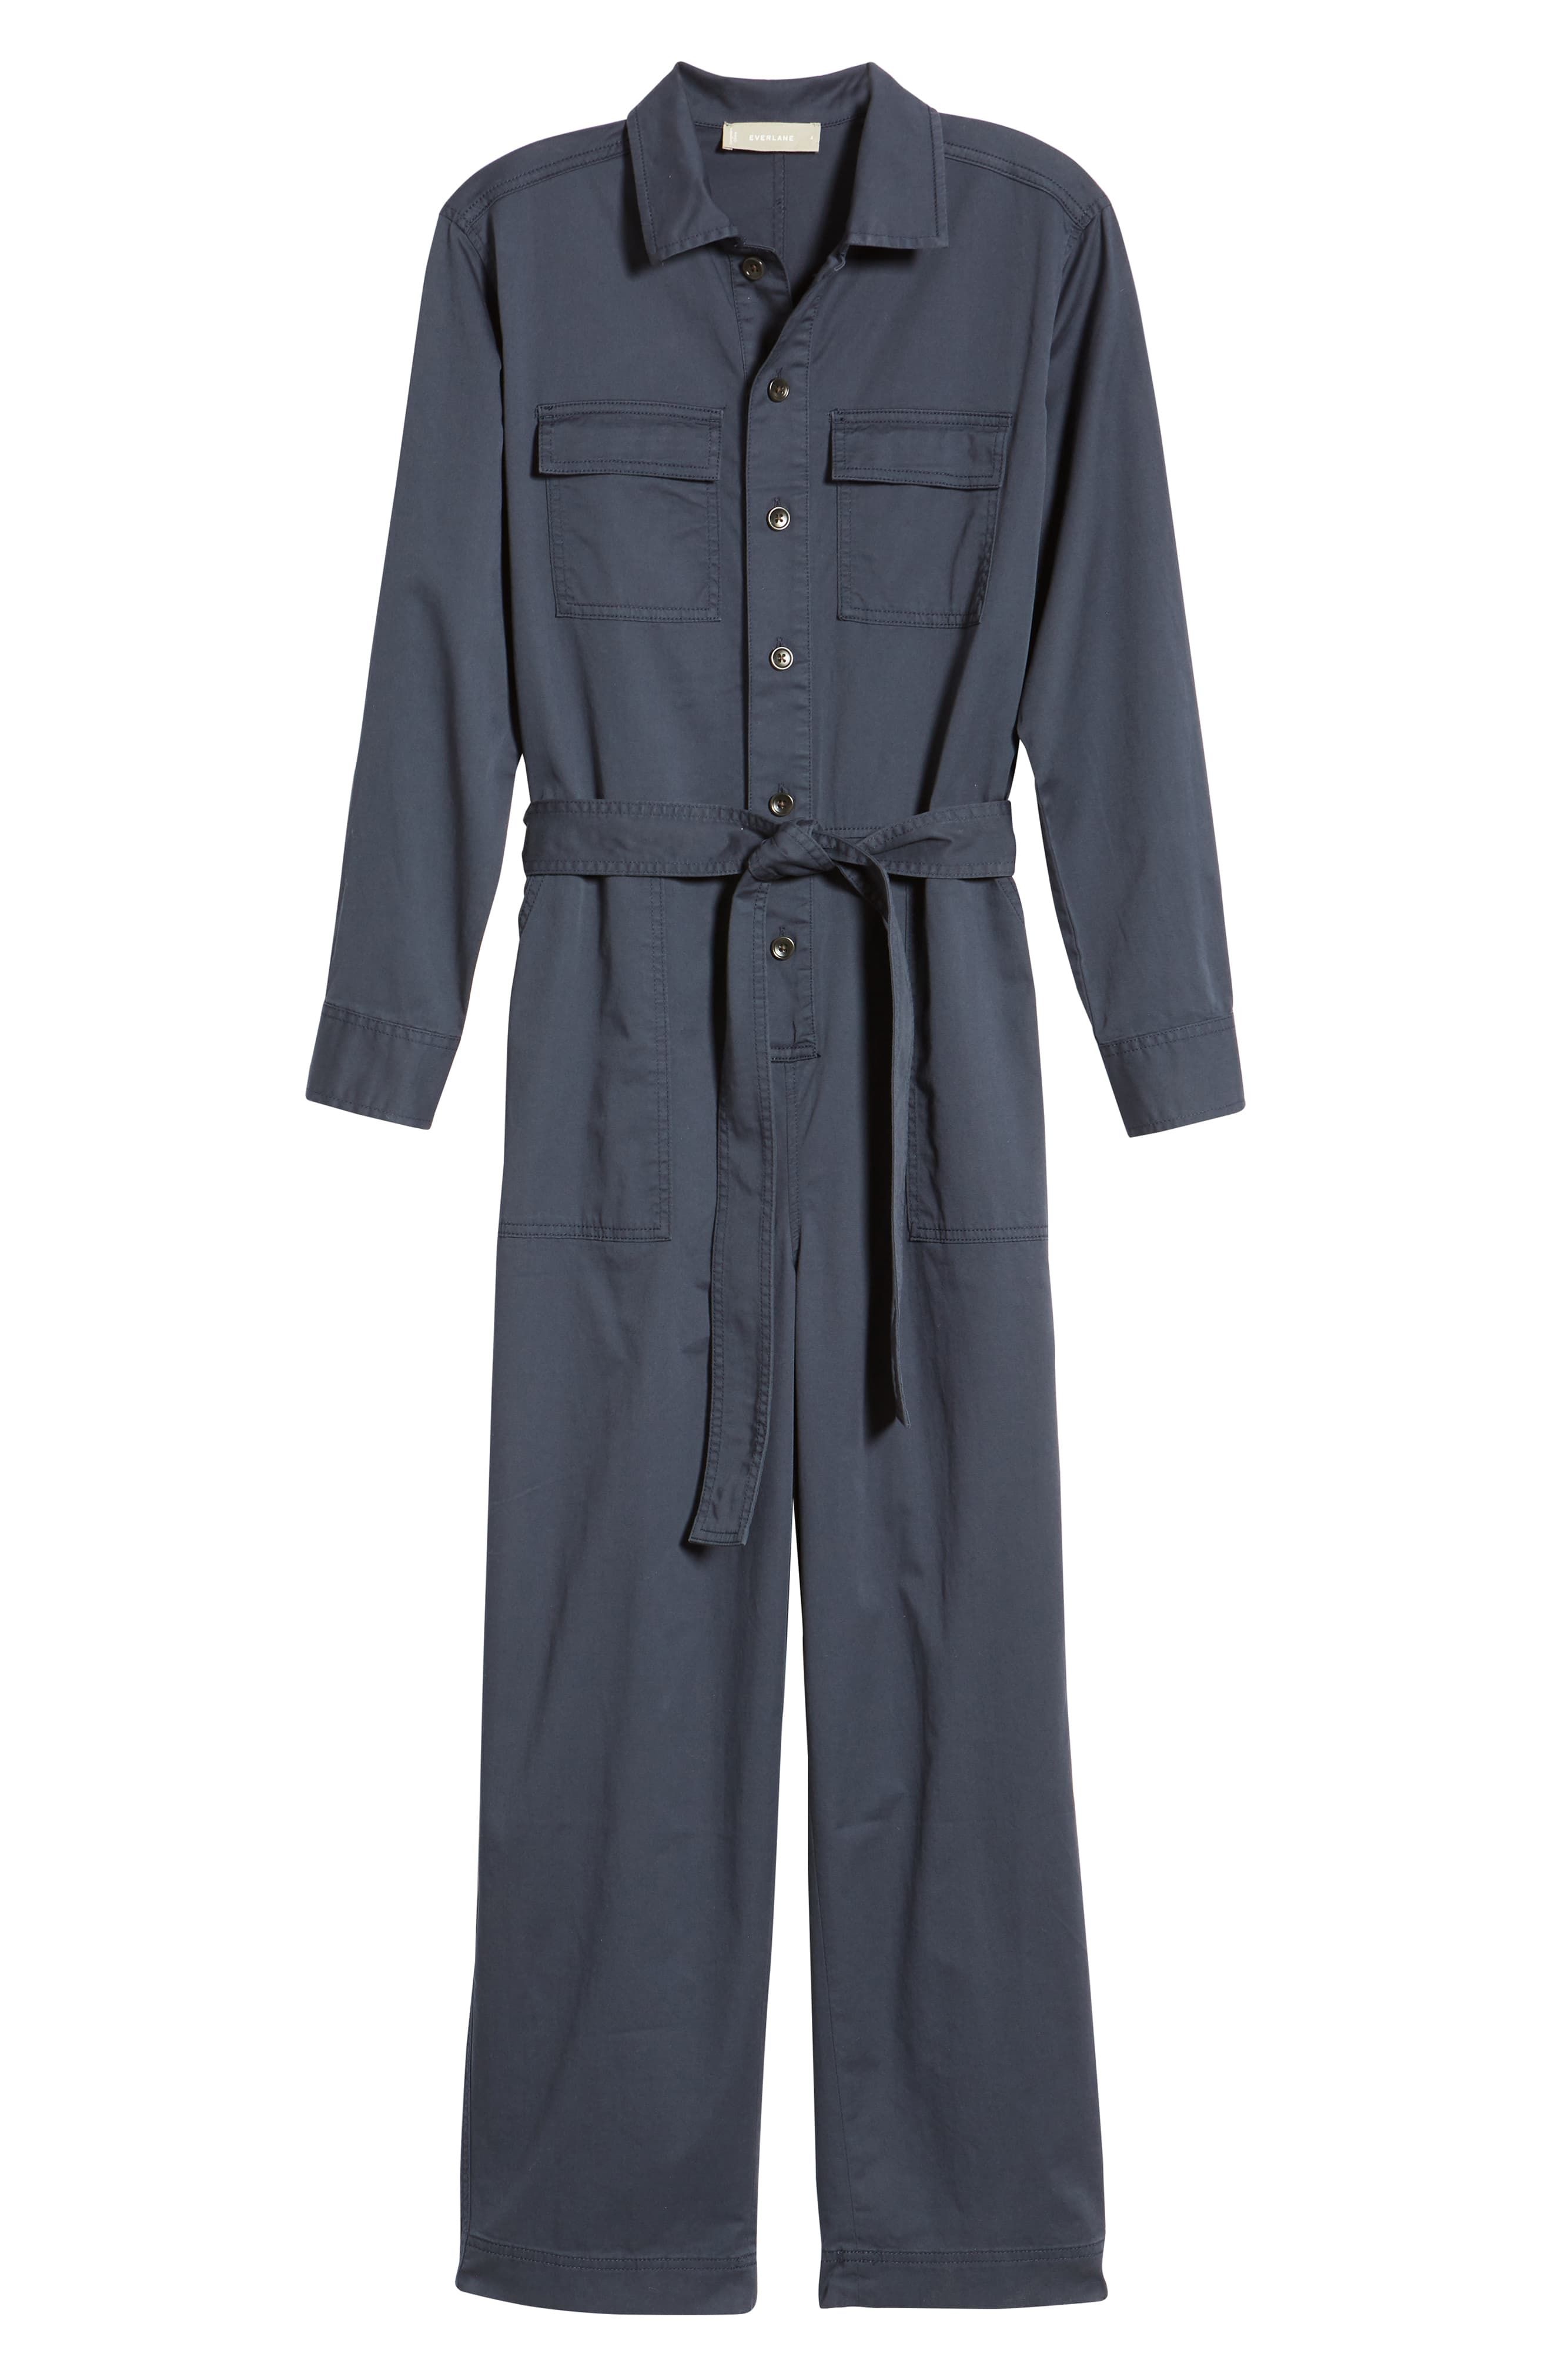 The Modern Utility Jumpsuit